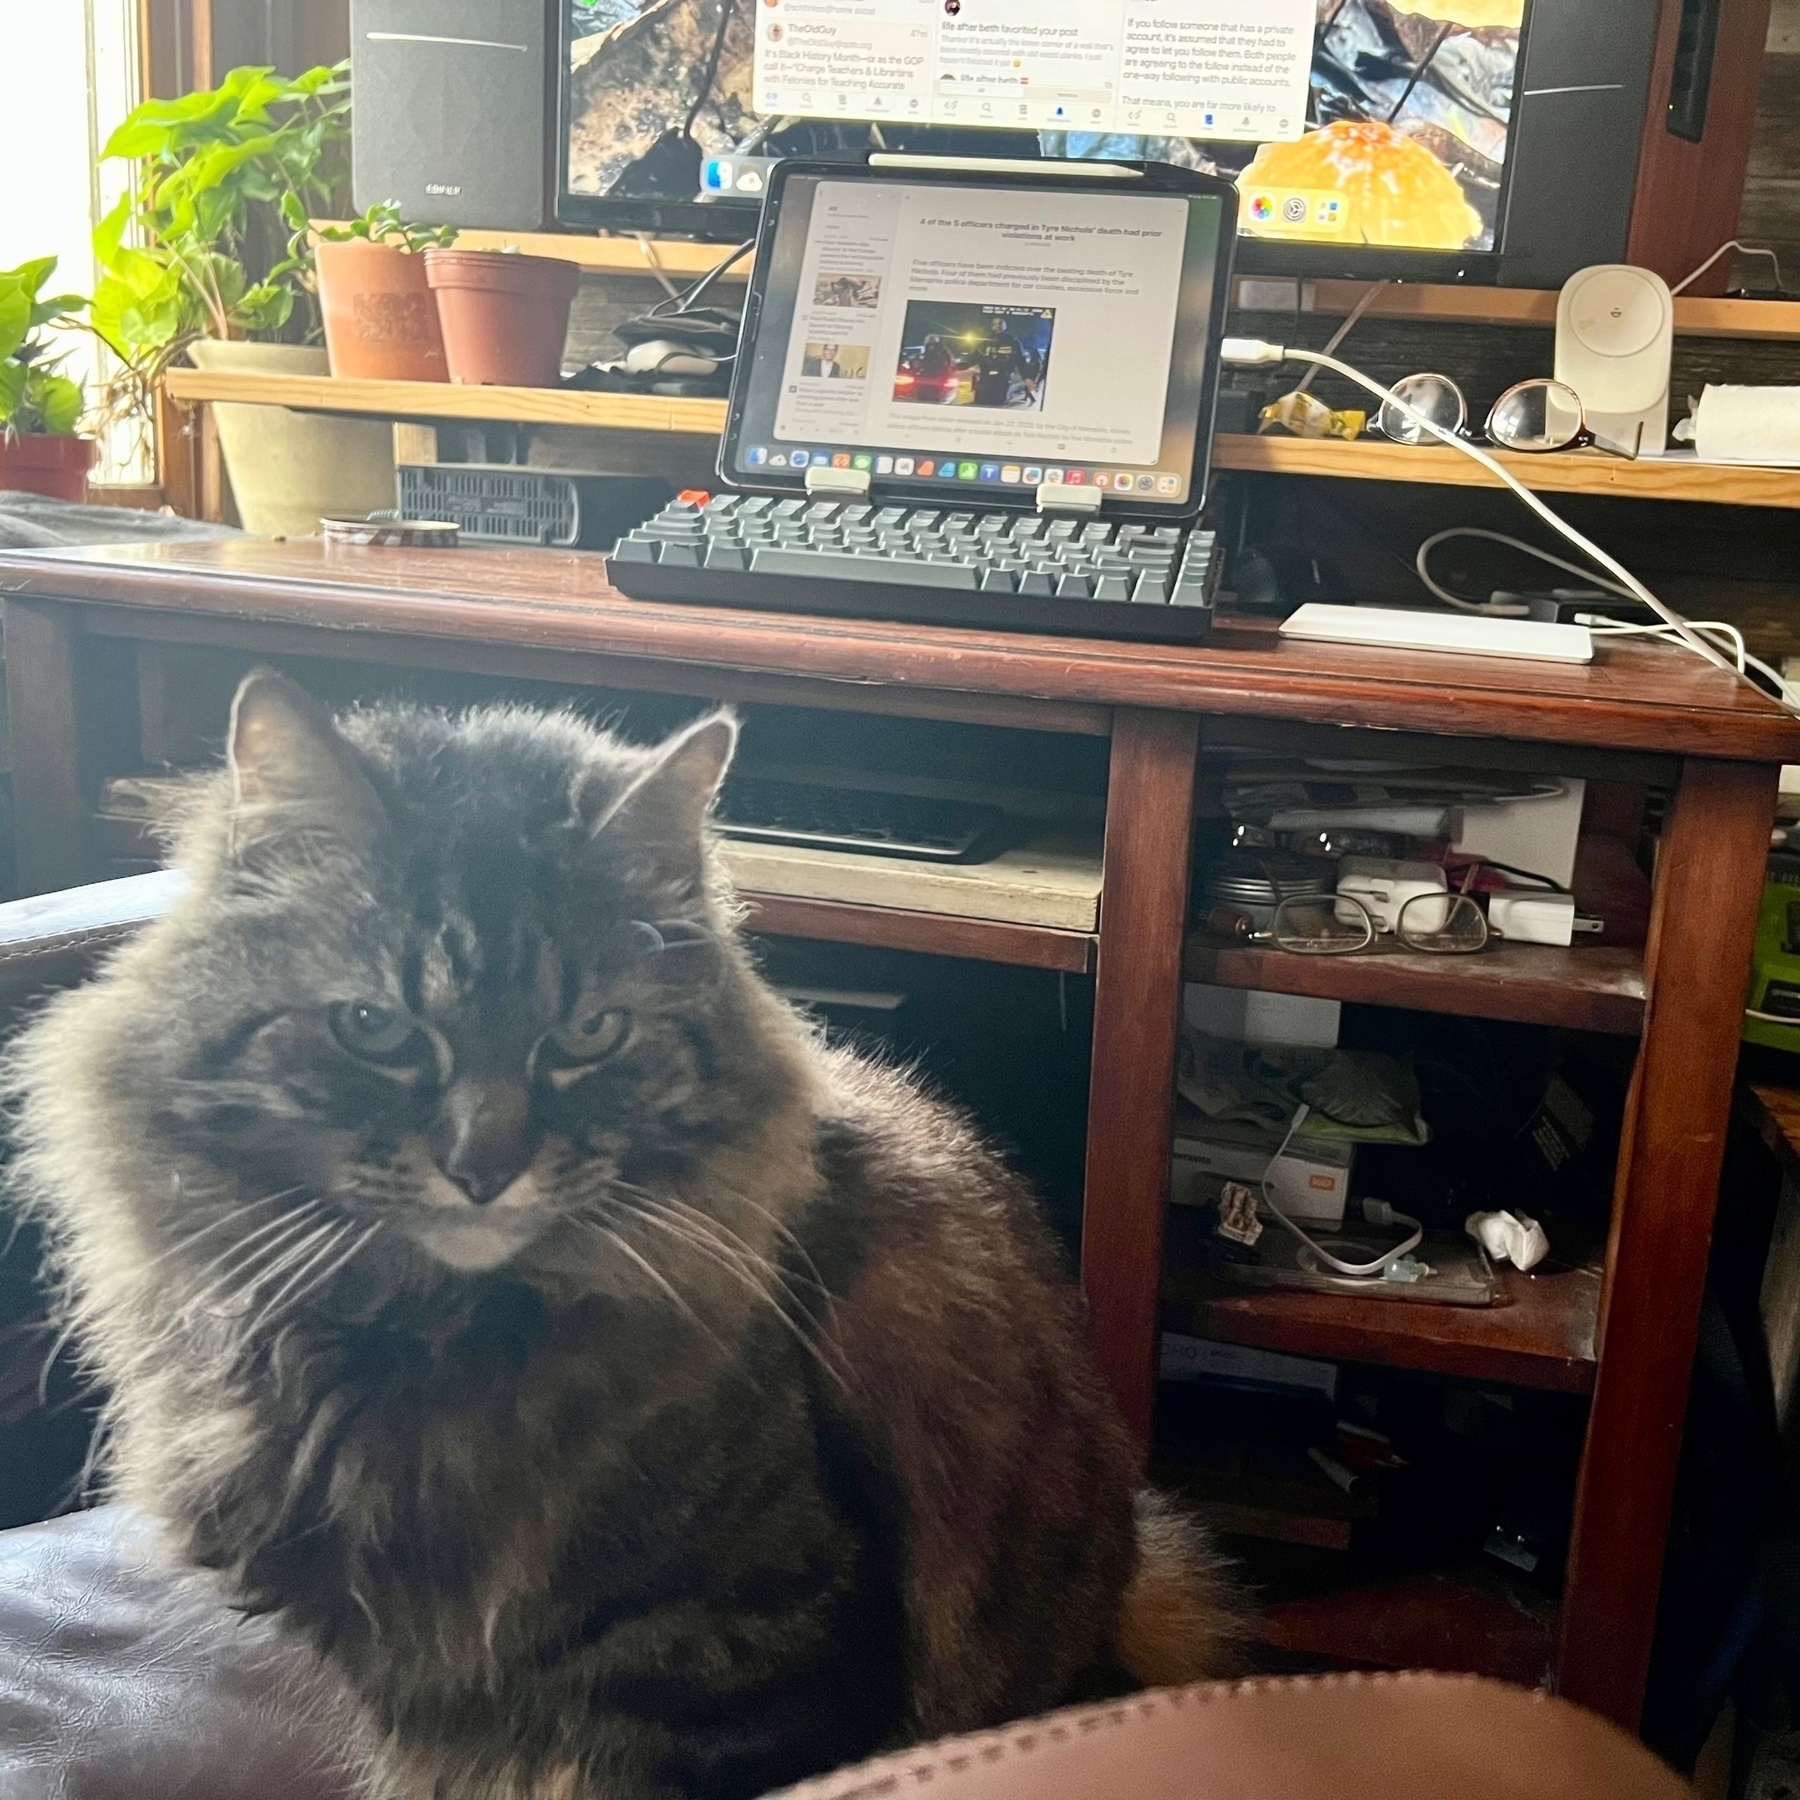 A long-haired grayish brown cat sits in a brown chair in front of a desk that I'm about to work at. She has relocated herself from my previous location to take up residence in my new intended workspace. In the background there is an iPad attached to a large display, clear evidence of my plan as well as her intention to disrupt those plans.